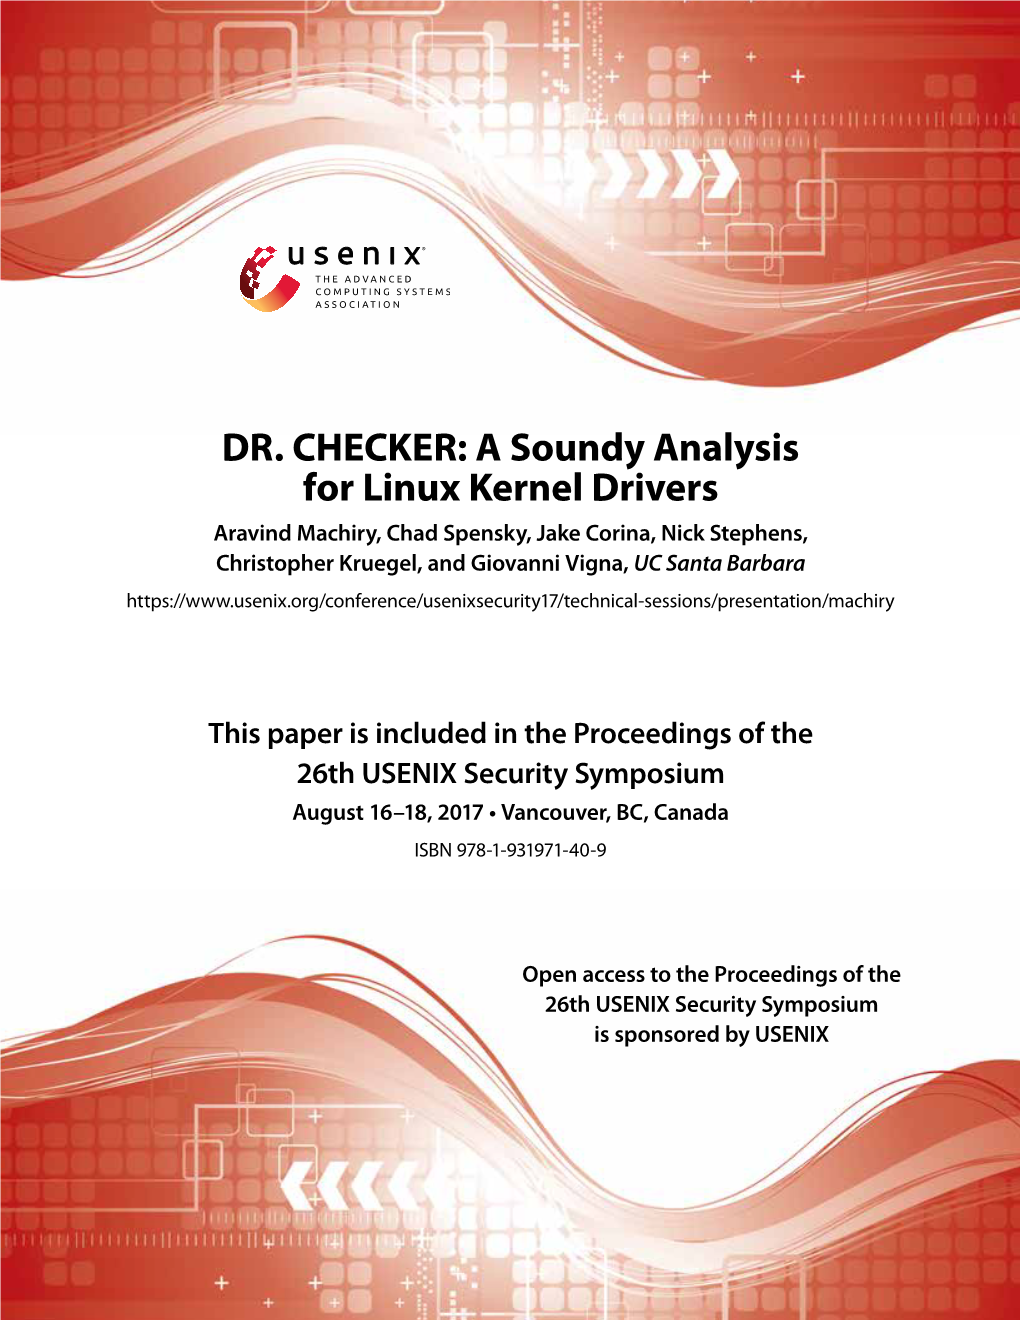 DR. CHECKER: a Soundy Analysis for Linux Kernel Drivers